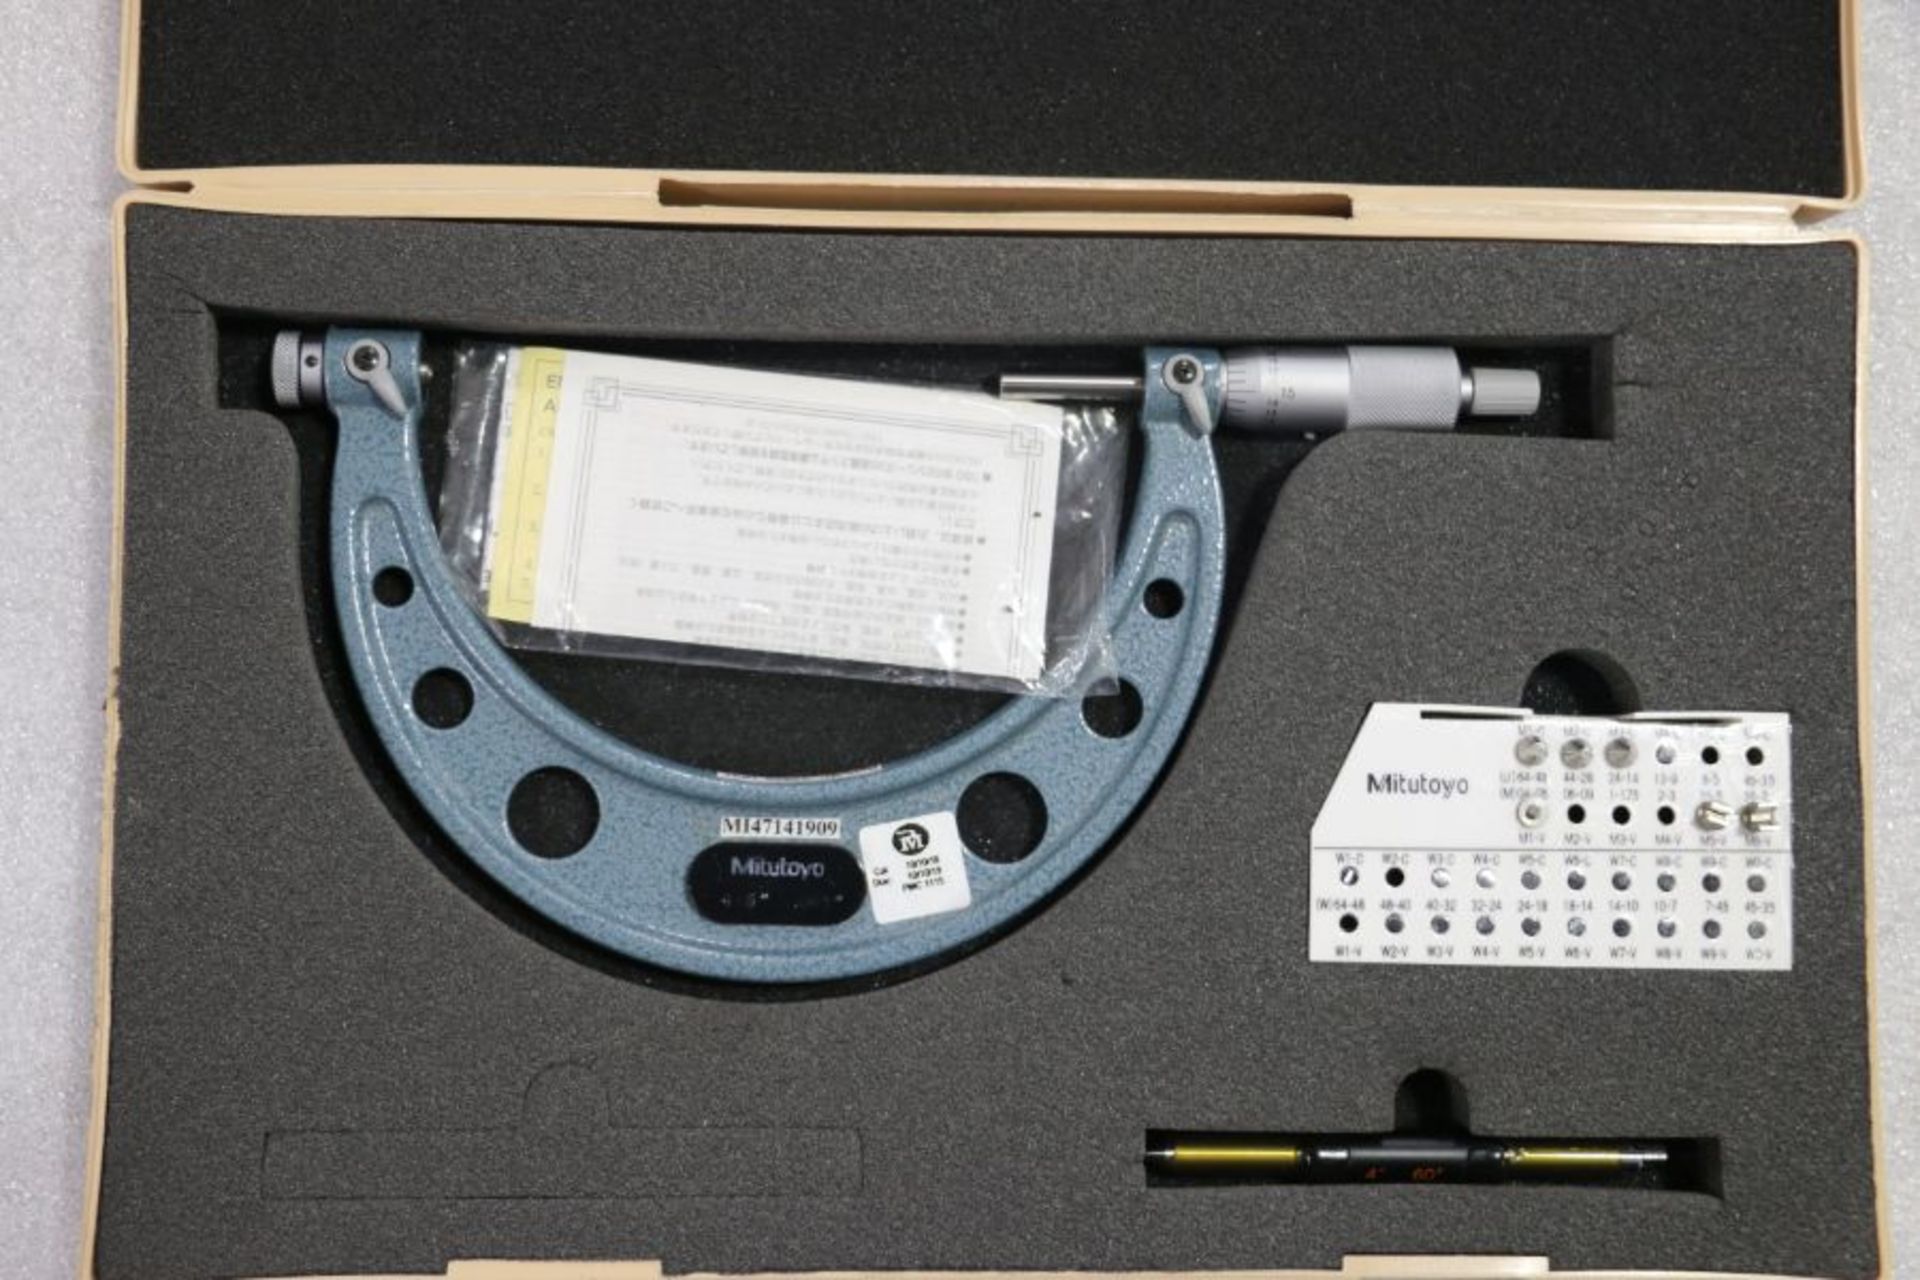 Mitutoyo 4" - 5" Pitch Micrometer